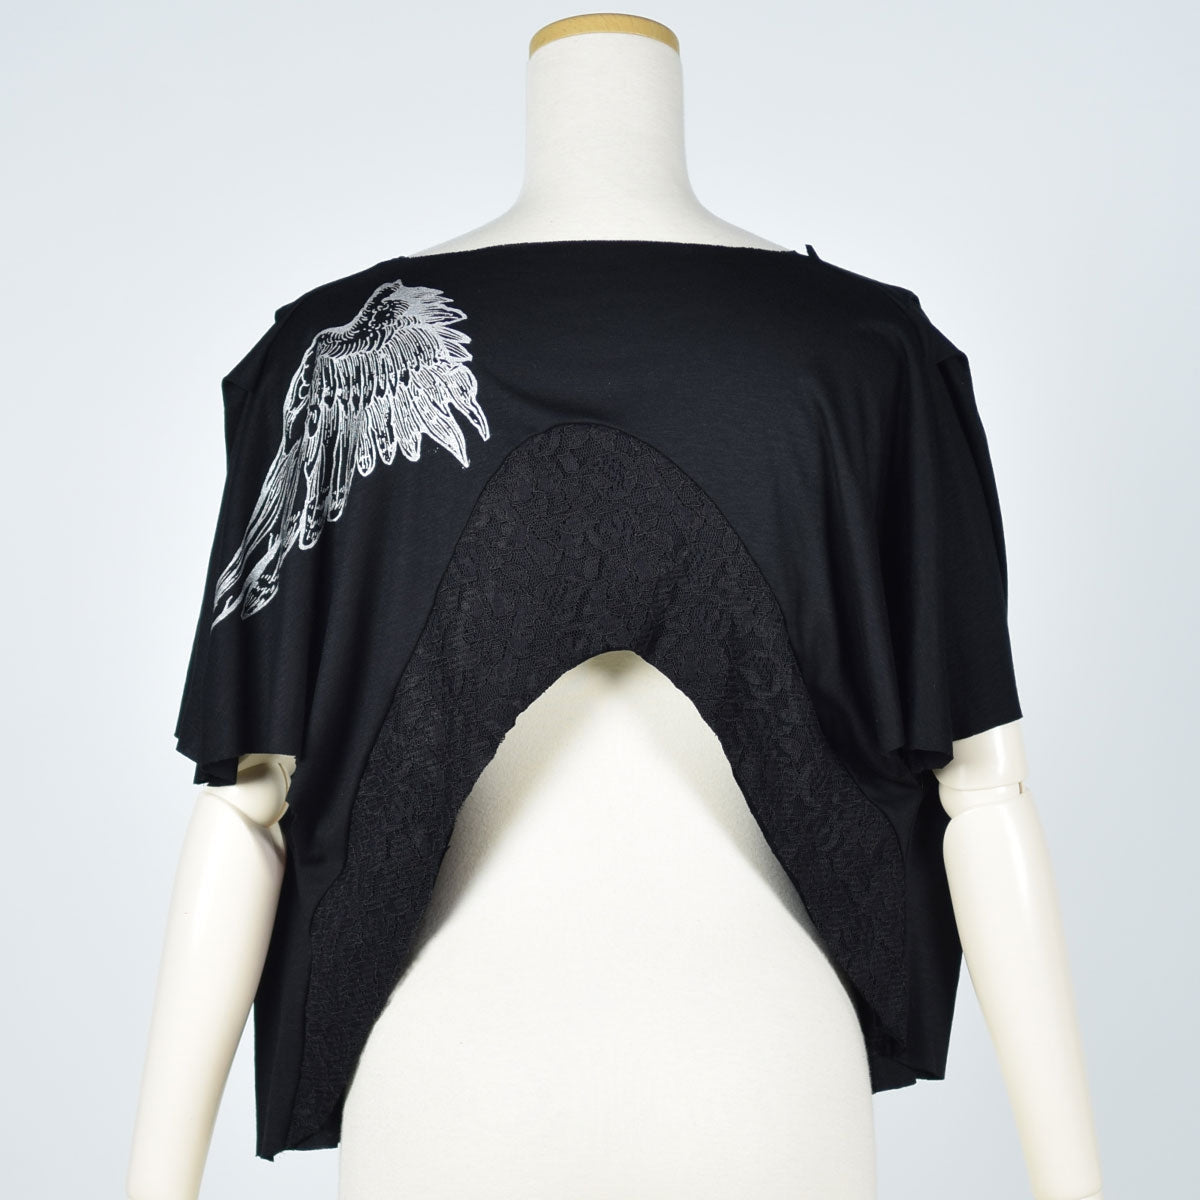 One Wing Short Tops